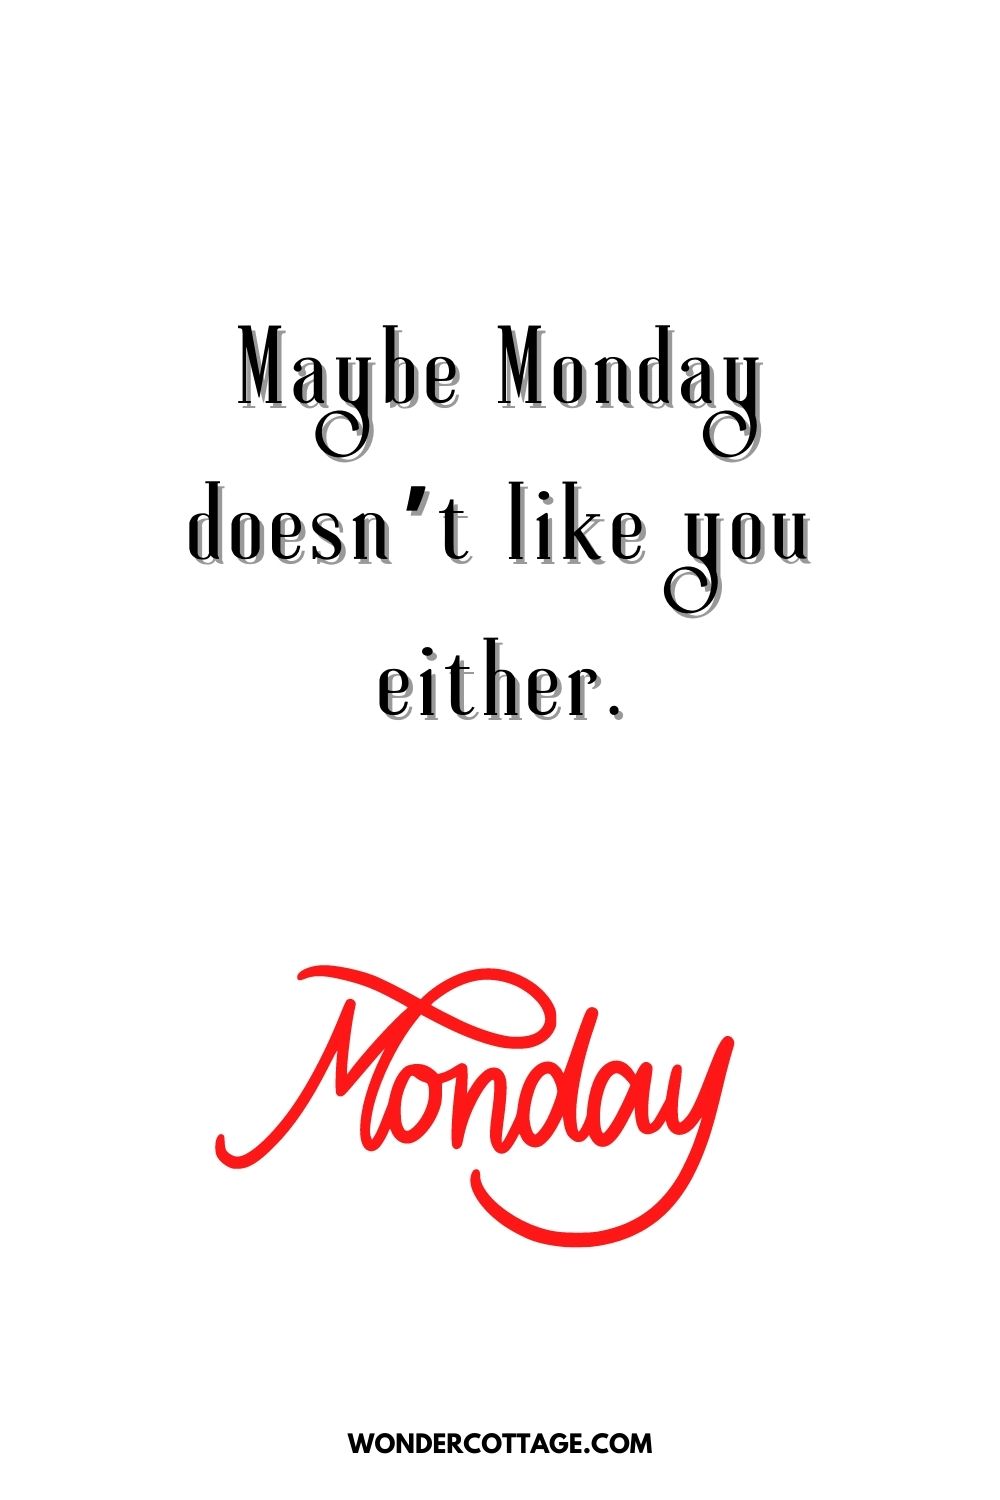 Maybe Monday doesn’t like you either.